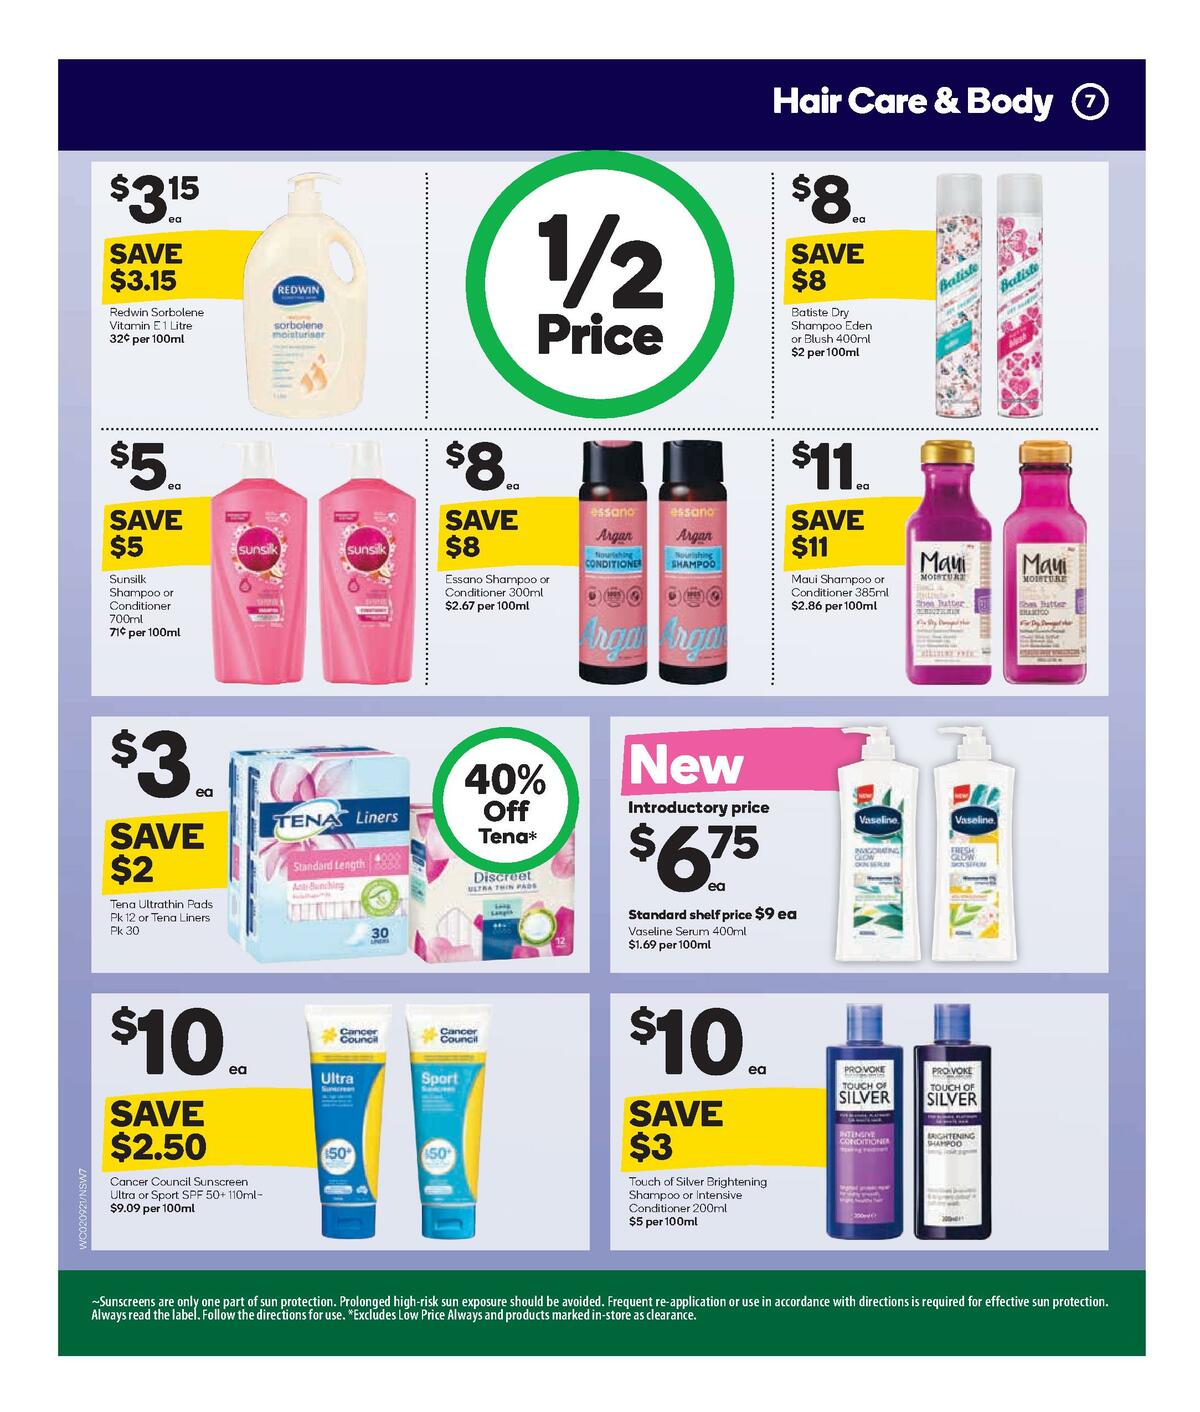 Woolworths Health & Beauty Catalogues from 2 September